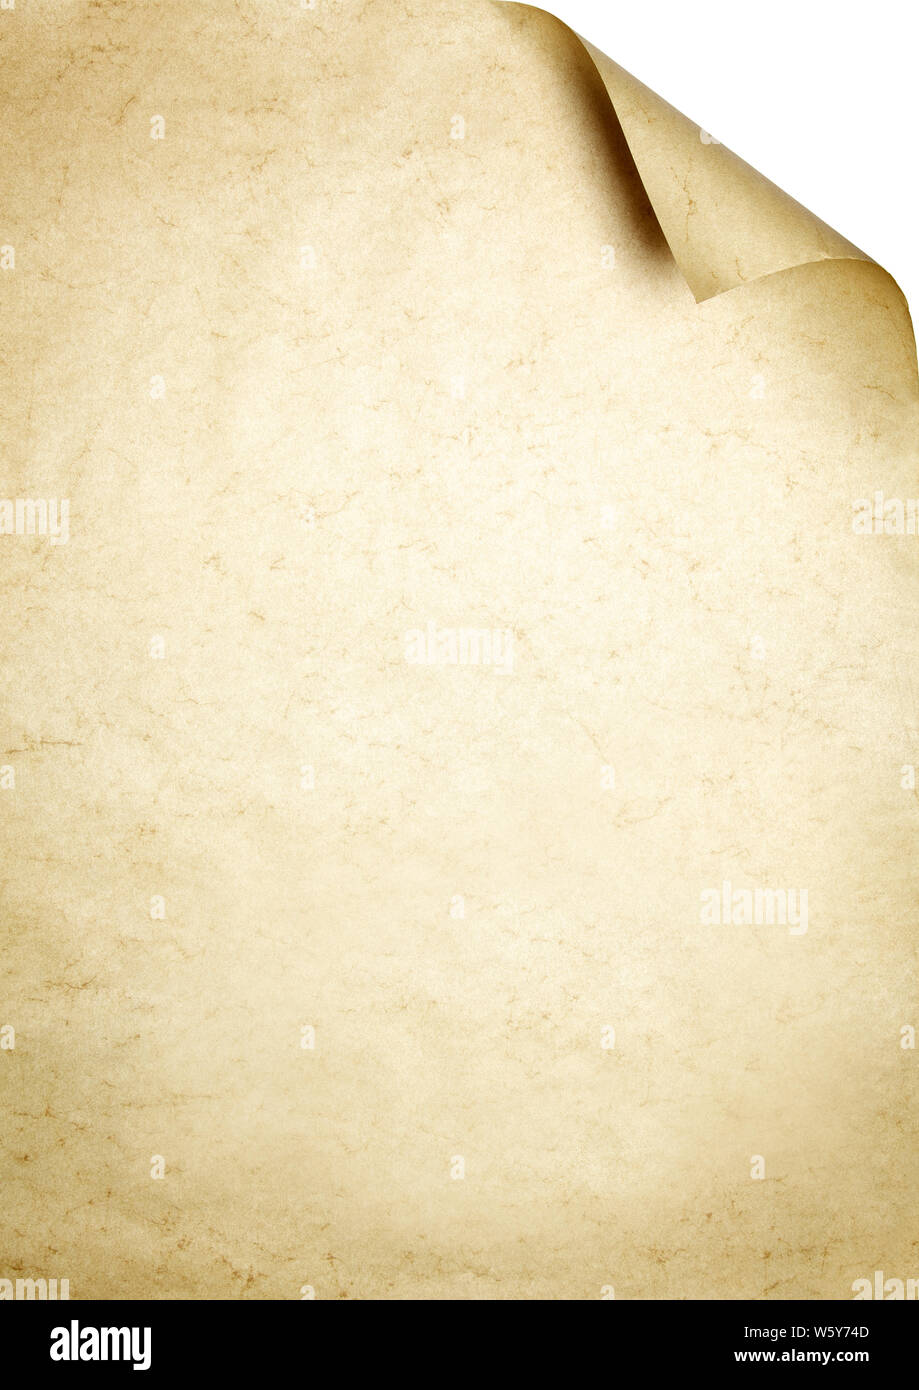 Parchment writing paper background Stock Photo - Alamy